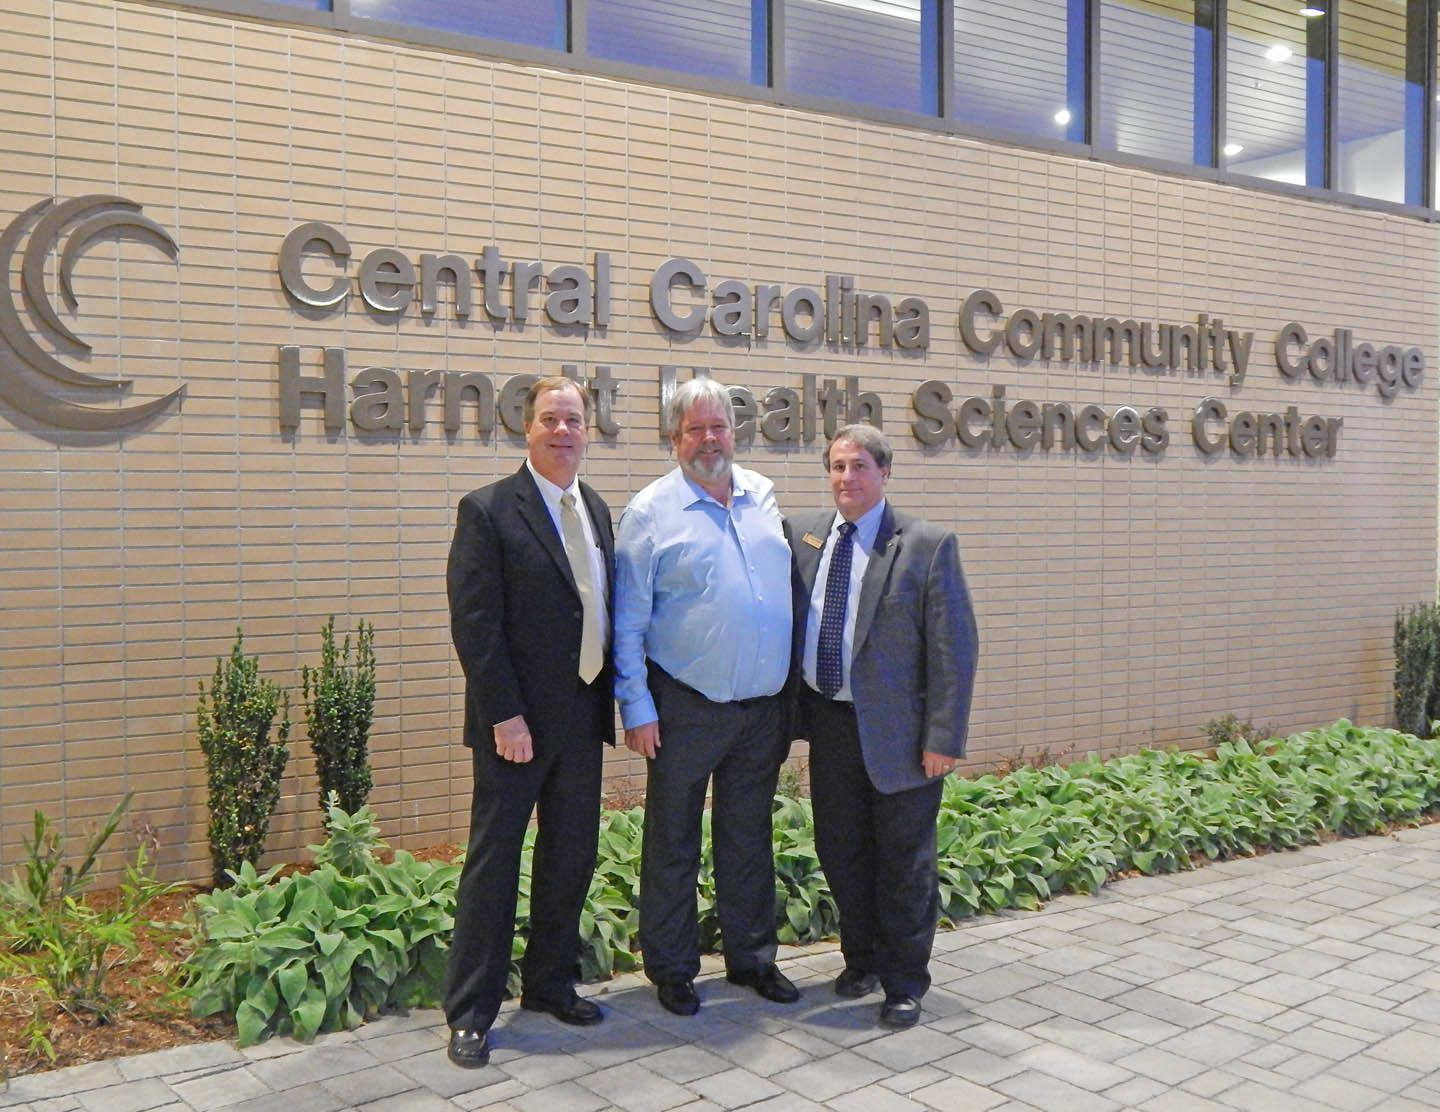 CCCC honors McNeill at Harnett Health Sciences Center